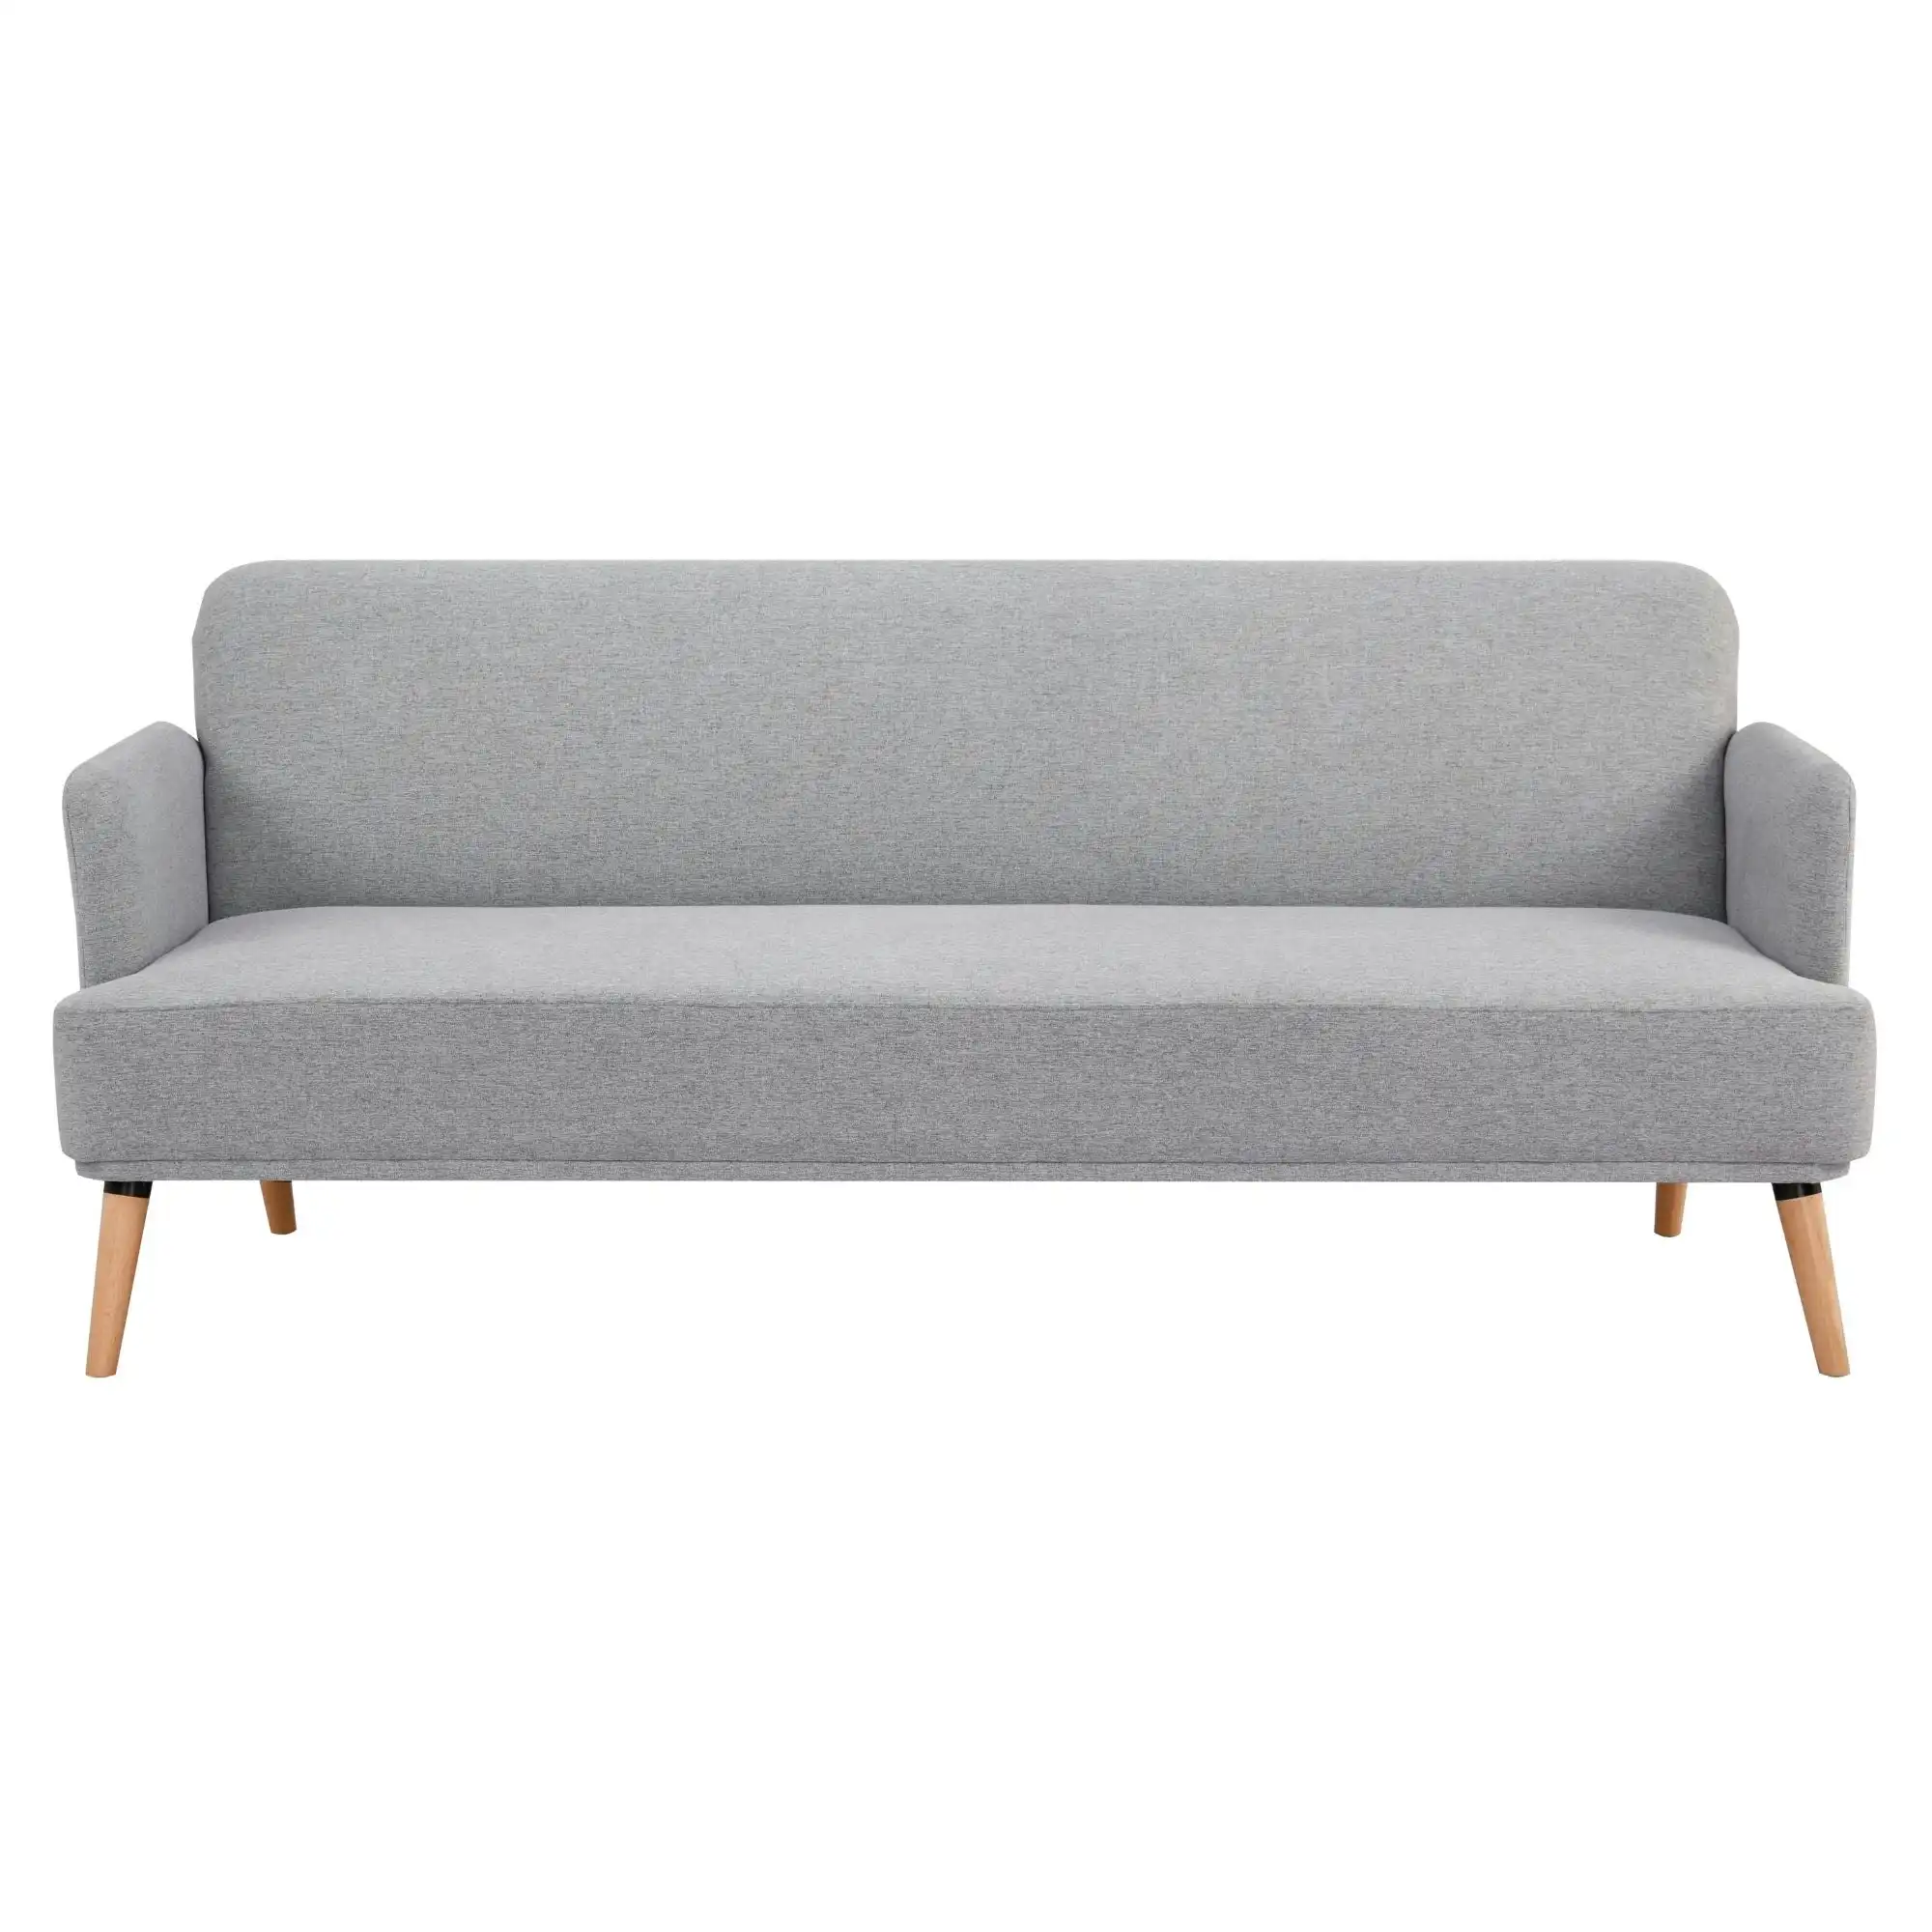 Merlin 3 Seater Sofa Bed